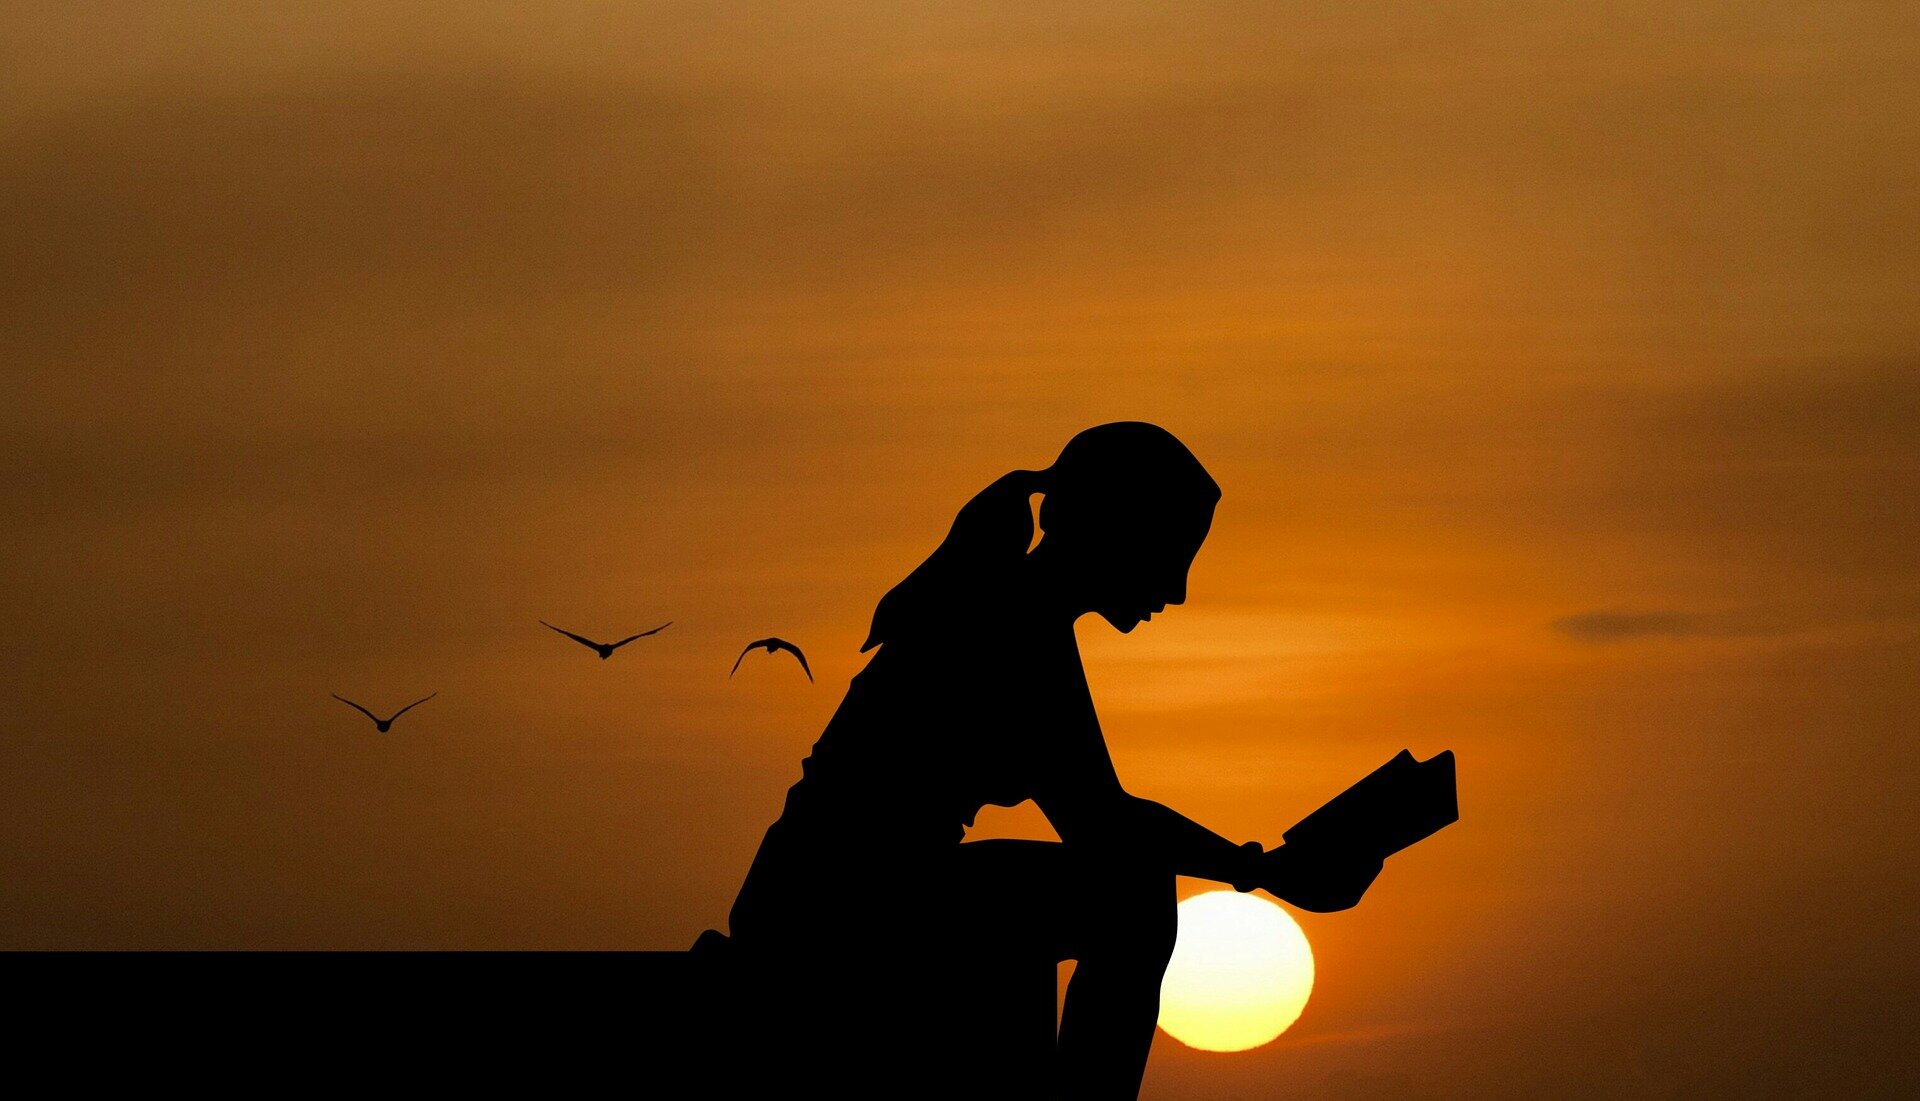 Lady reads a book at sunset